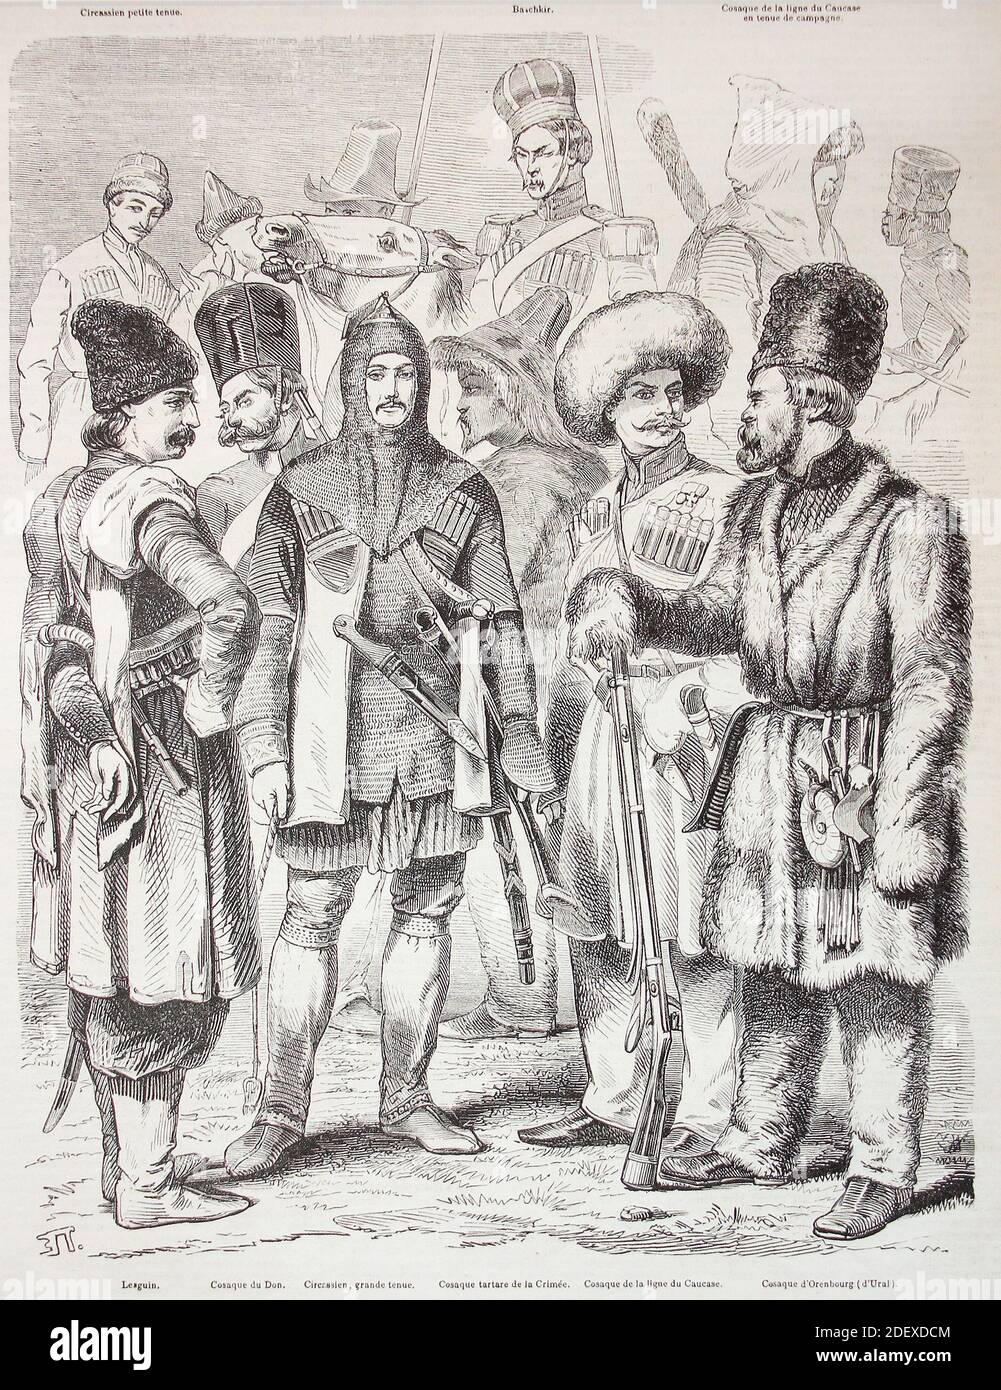 Irregular troops of the Russian army in the 19th century. An engraving from the 1850s. Stock Photo